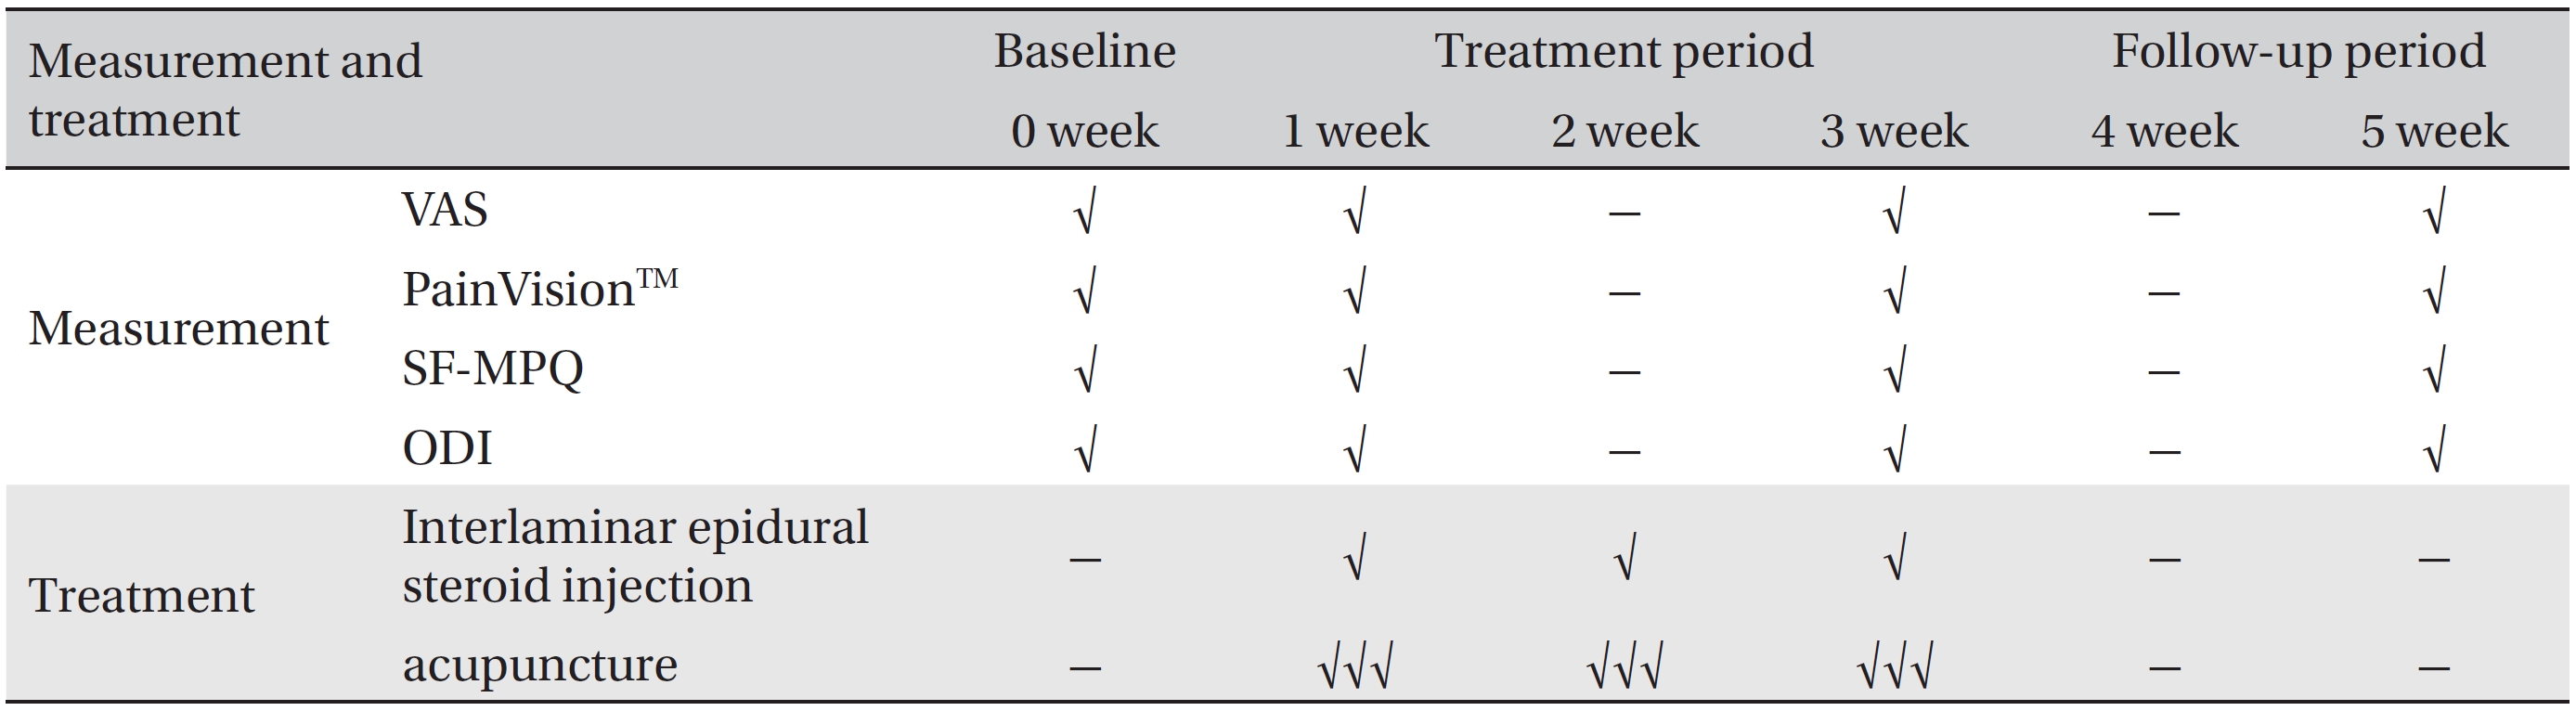 Schedule of treatments and outcome measurements throughout the 5-week pilot randomized controlled trial